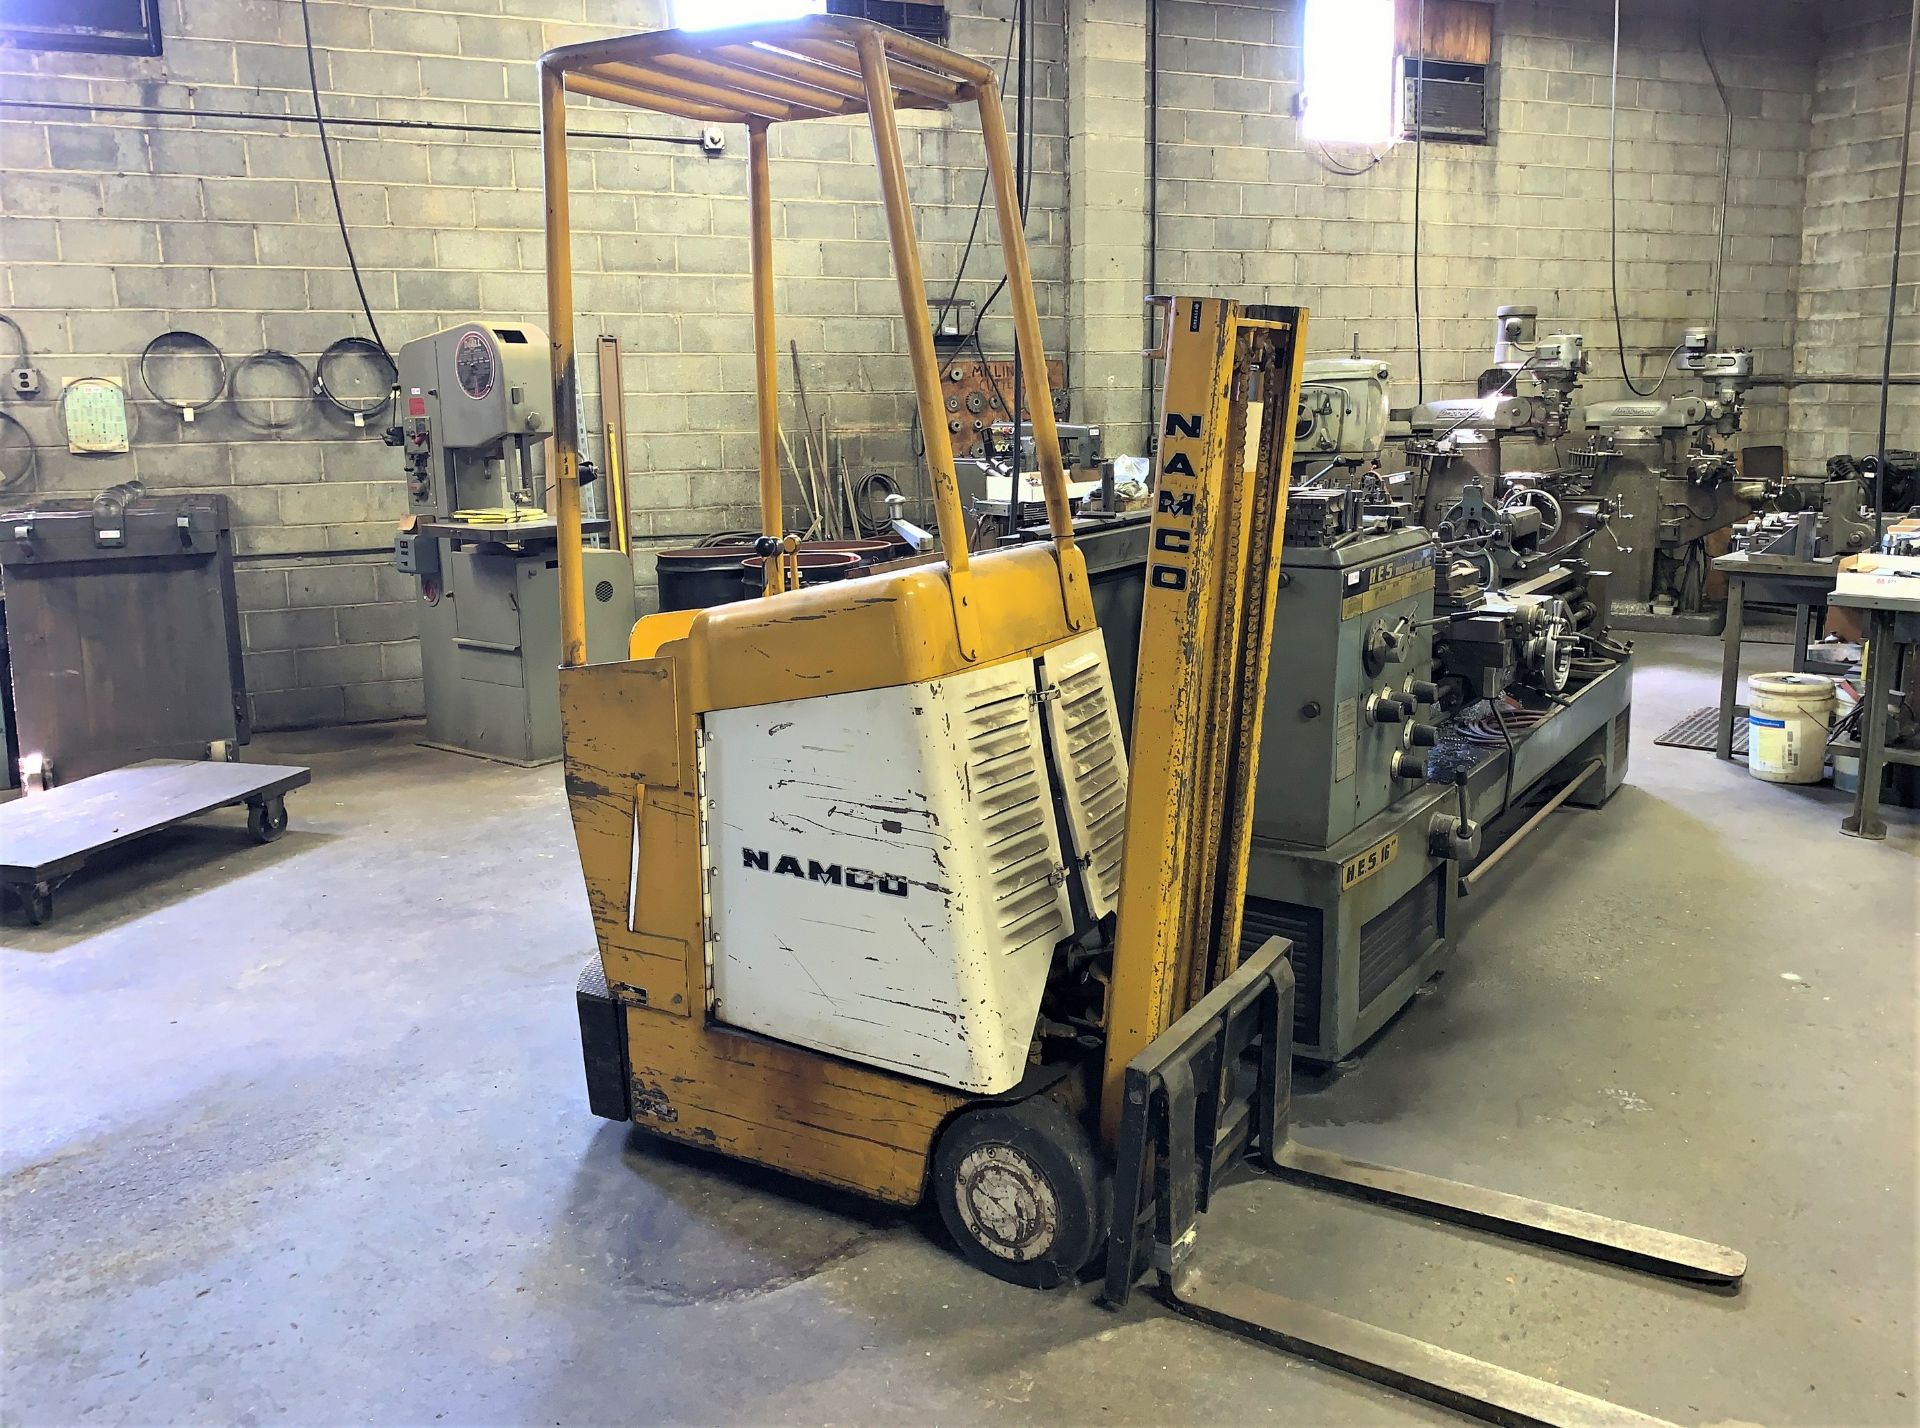 Namco Mdl. 2015 Fork Lift, 2000Lb Capacity, 15" Load Center (Located in Levittown, PA Facility)